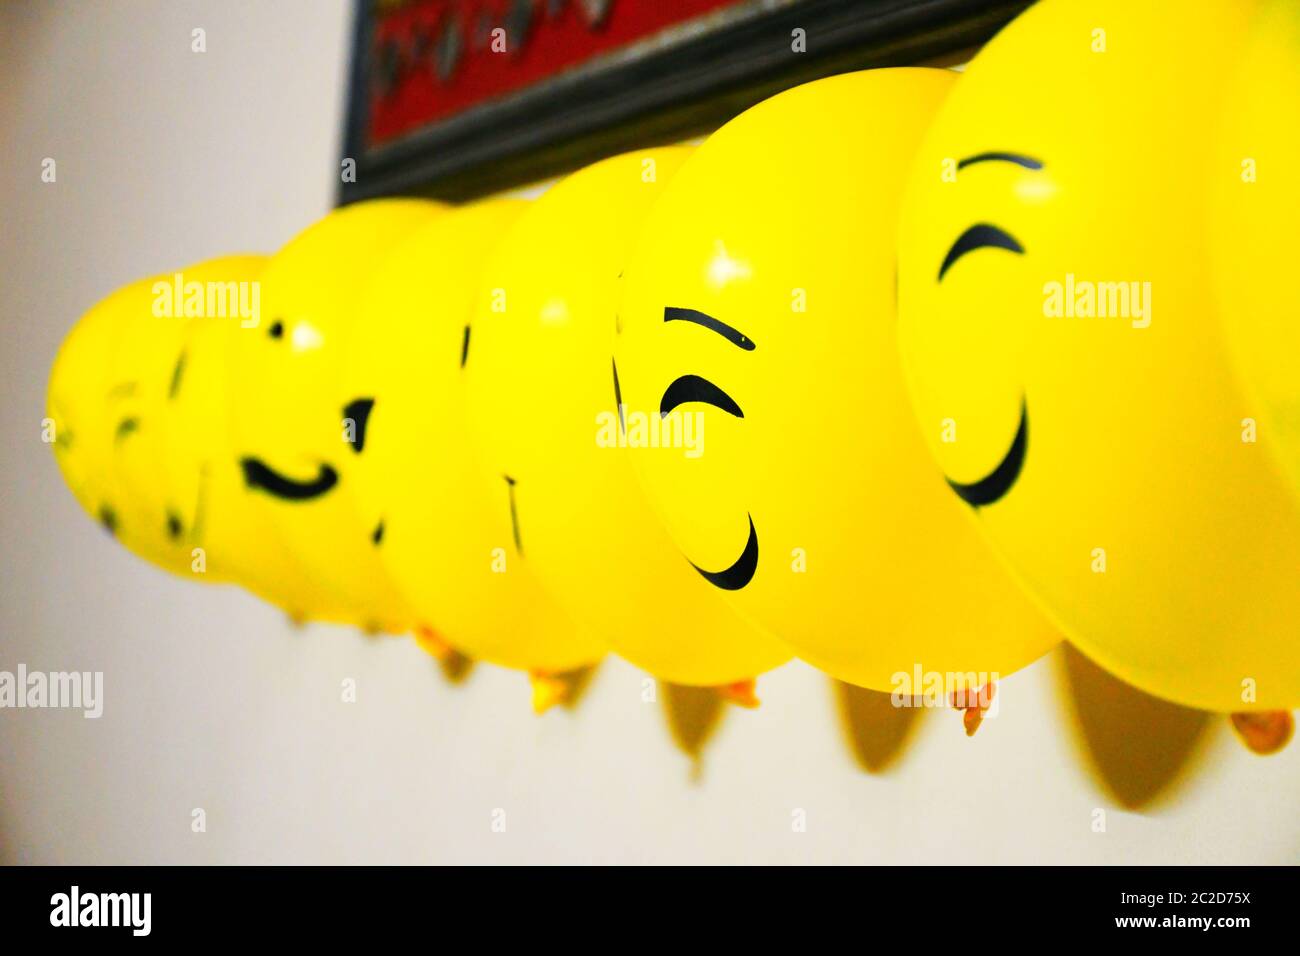 Balloons decoration on wall, emoji faces on balloons Stock Photo